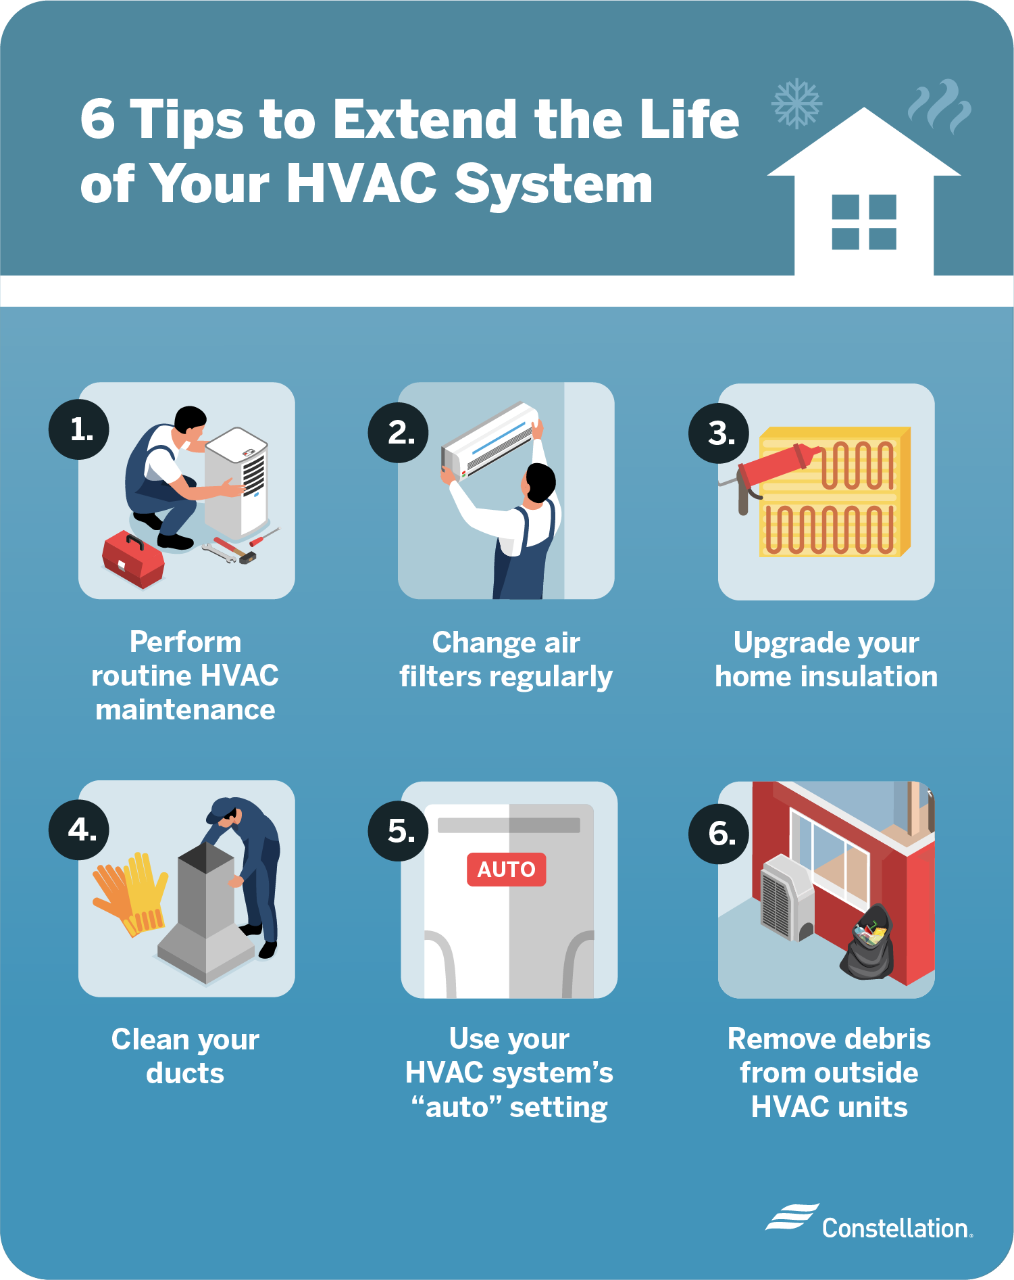 Tips to extend the life of your HVAC system.